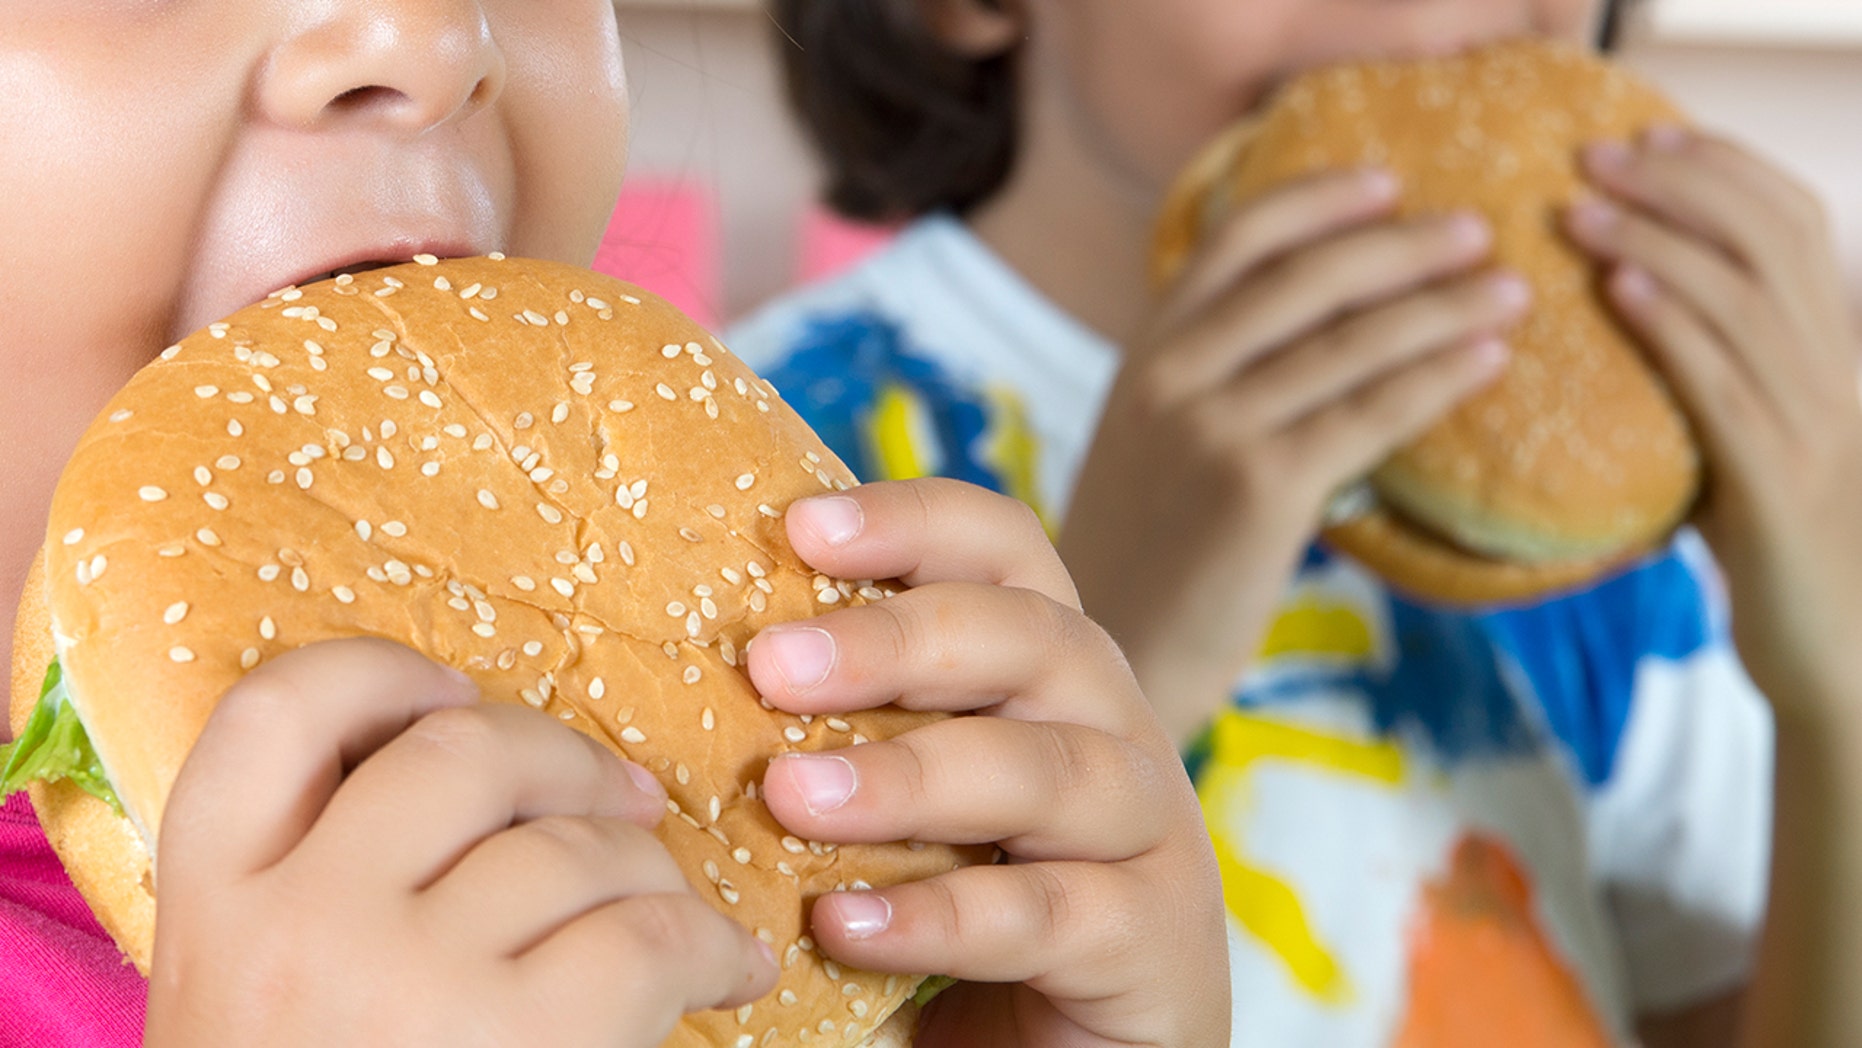 Fast food companies spend billions disproportionately targeting minority youth, study finds